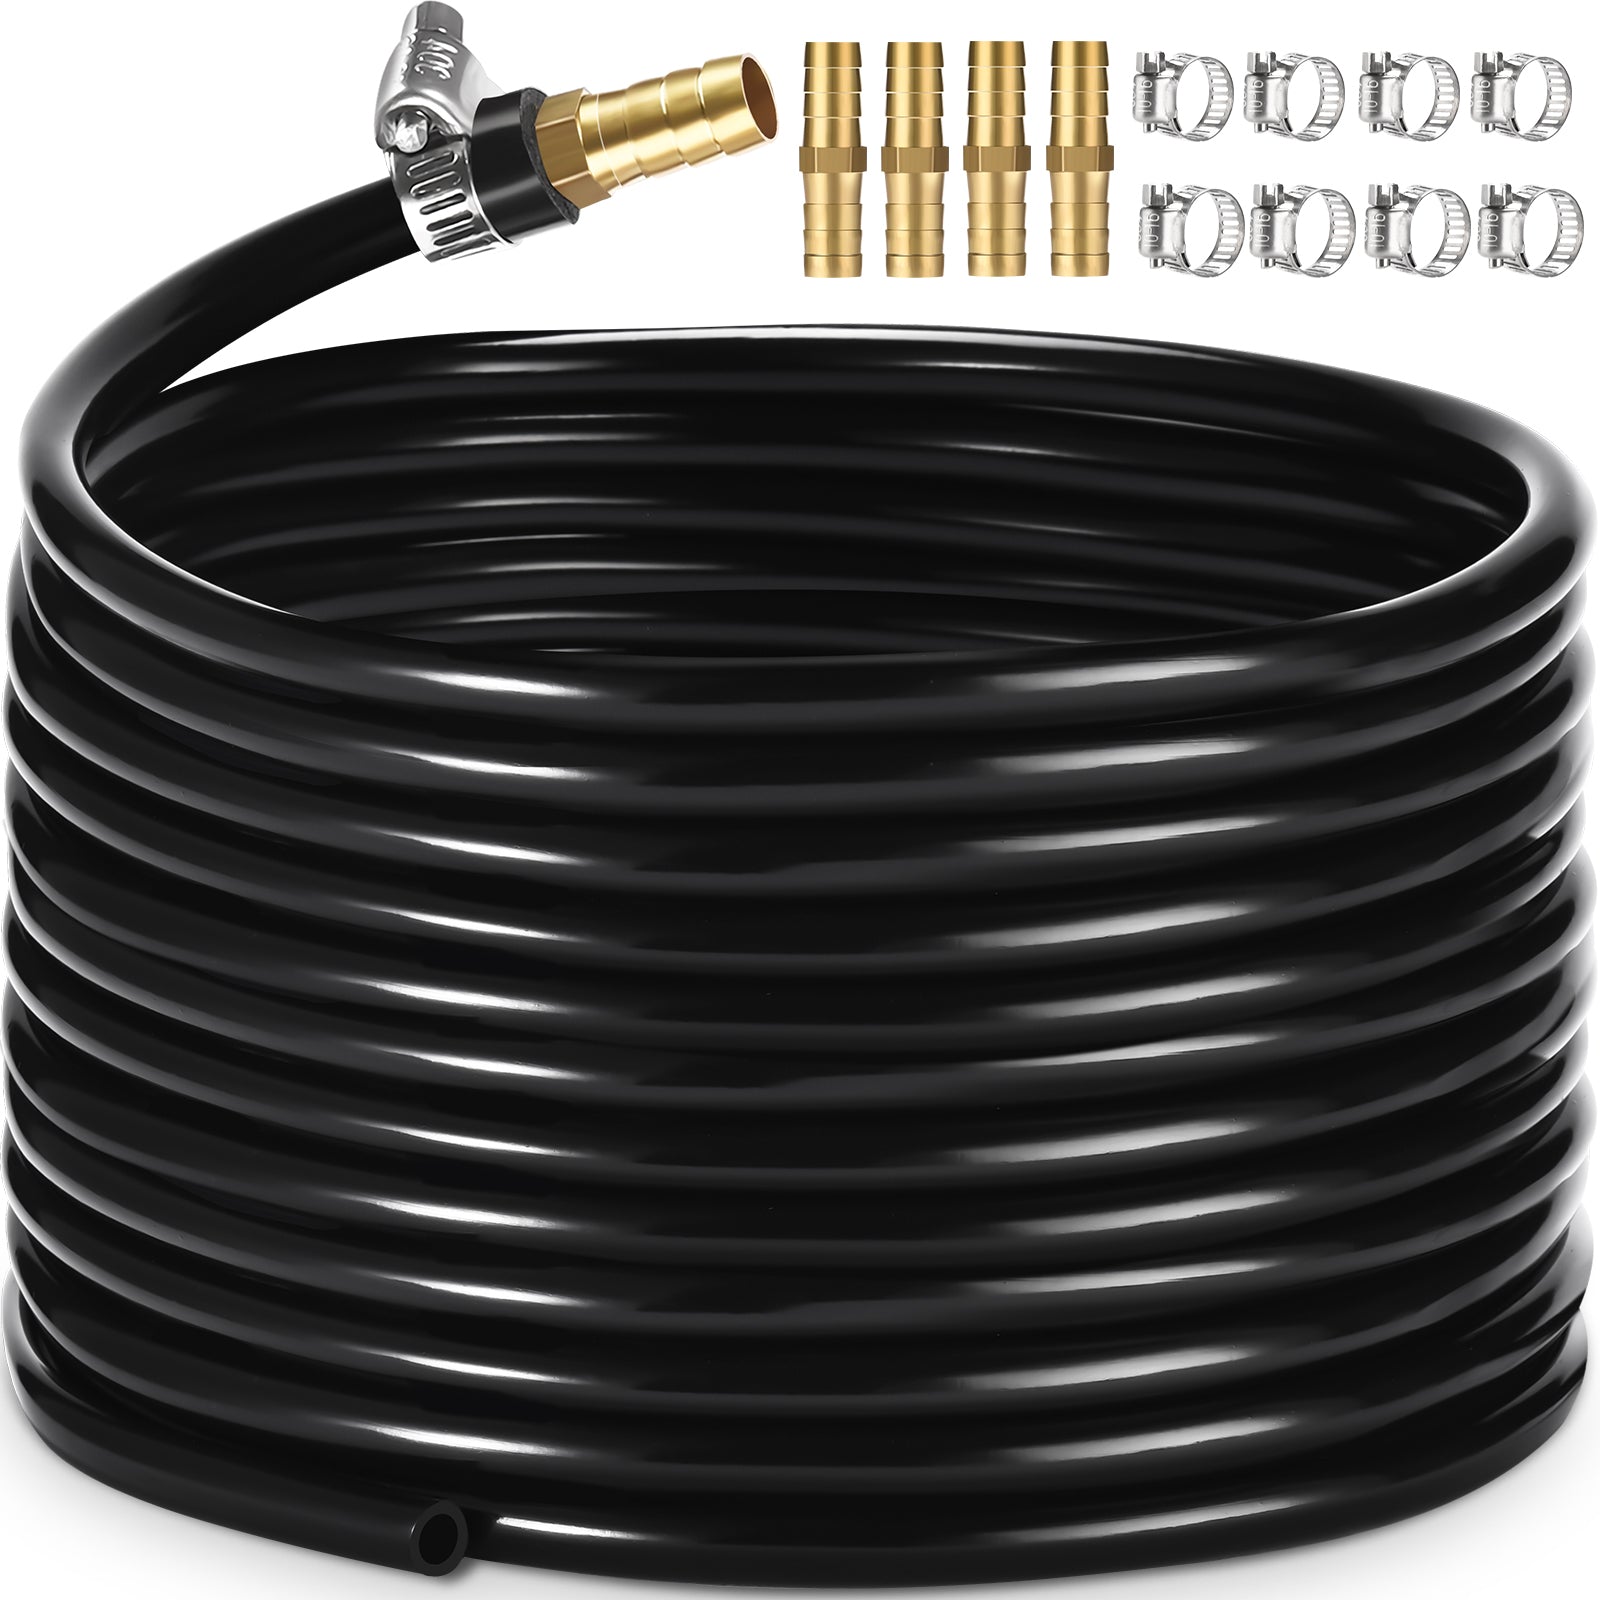 Self Sinking Aeration Hose,100 feet ⅜ inch Pond Aerator Hose Kit with 4 Copper Menders and 8 Stainless Steel Hose Clamps Weighted Air Pump Tubing for Pond Water Lake Aeration